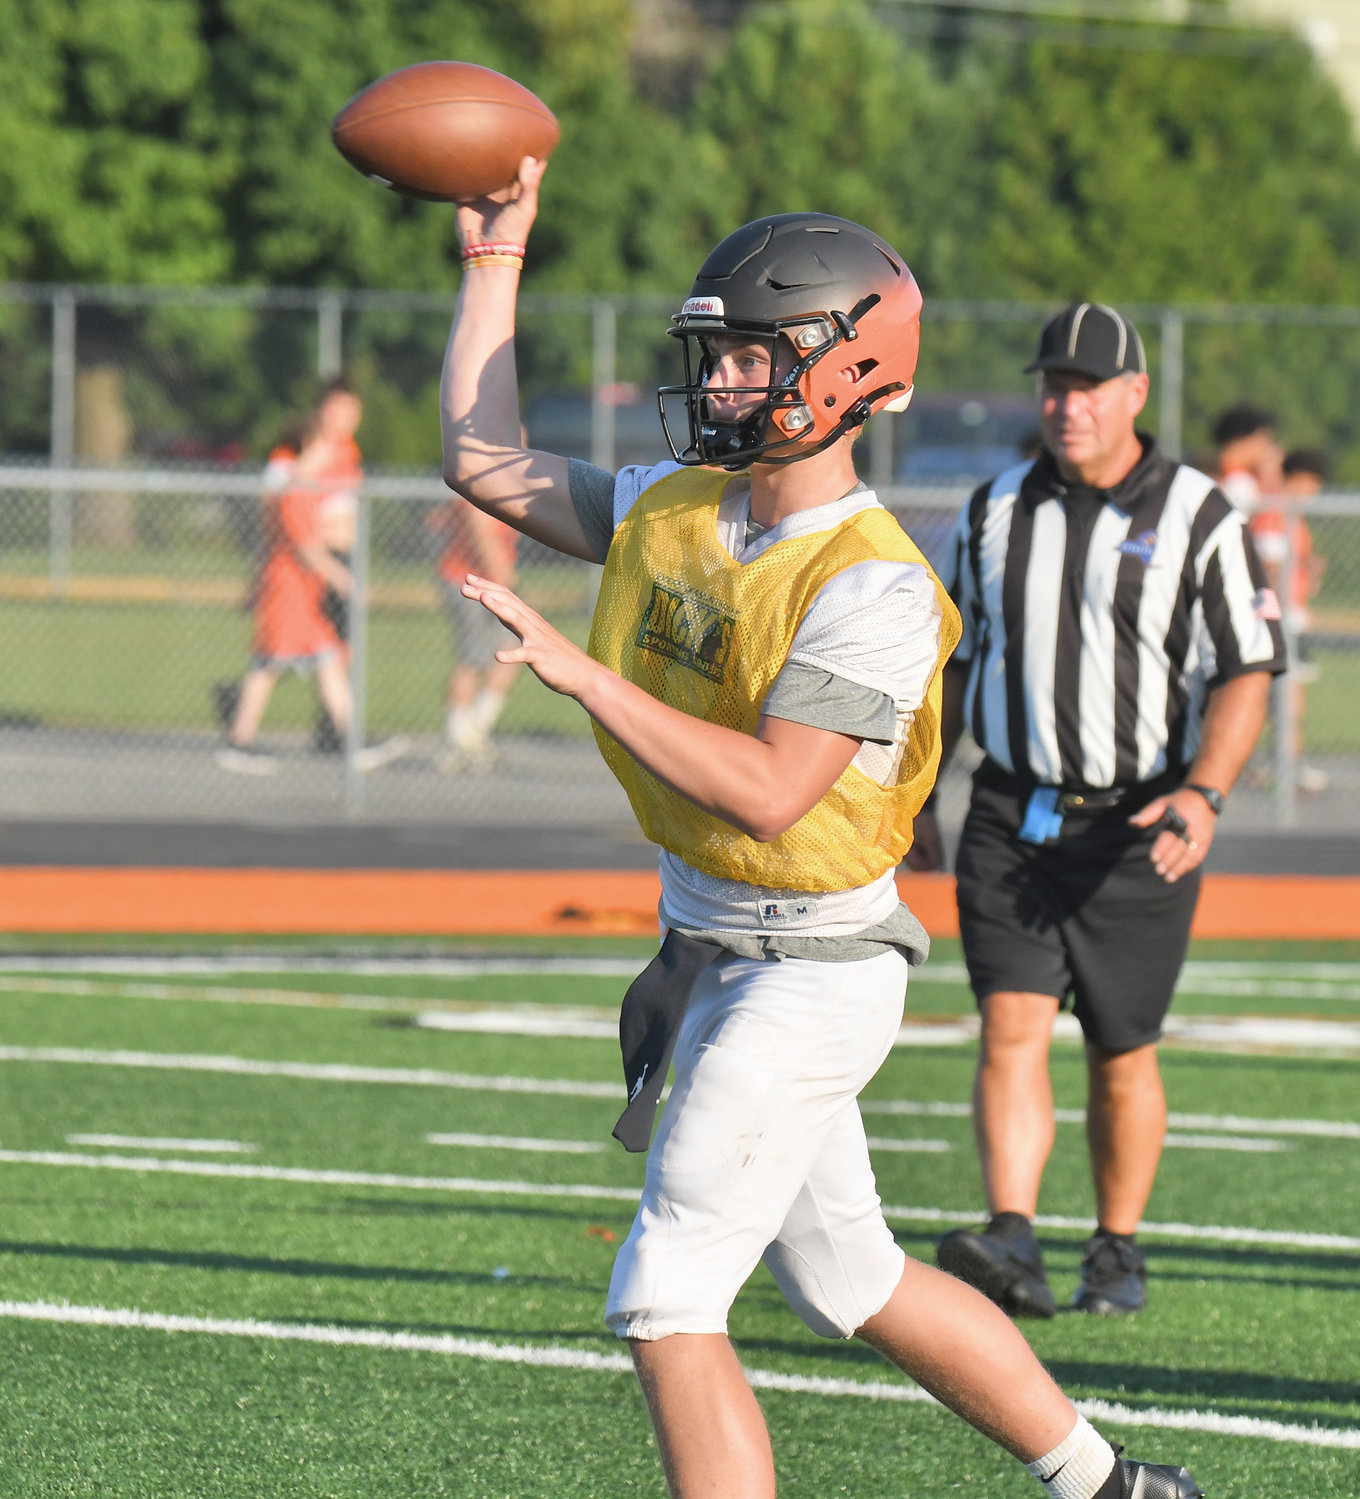 Rome Free Academy junior quarterback Evan Carlson-Stephenson makes a pass during a seven-on-seven scrimmage with Camden on Aug. 29. The Black Knights will need Carlson-Stephenson's experience and leadership to help overcome the loss of a number of skill players on offense.